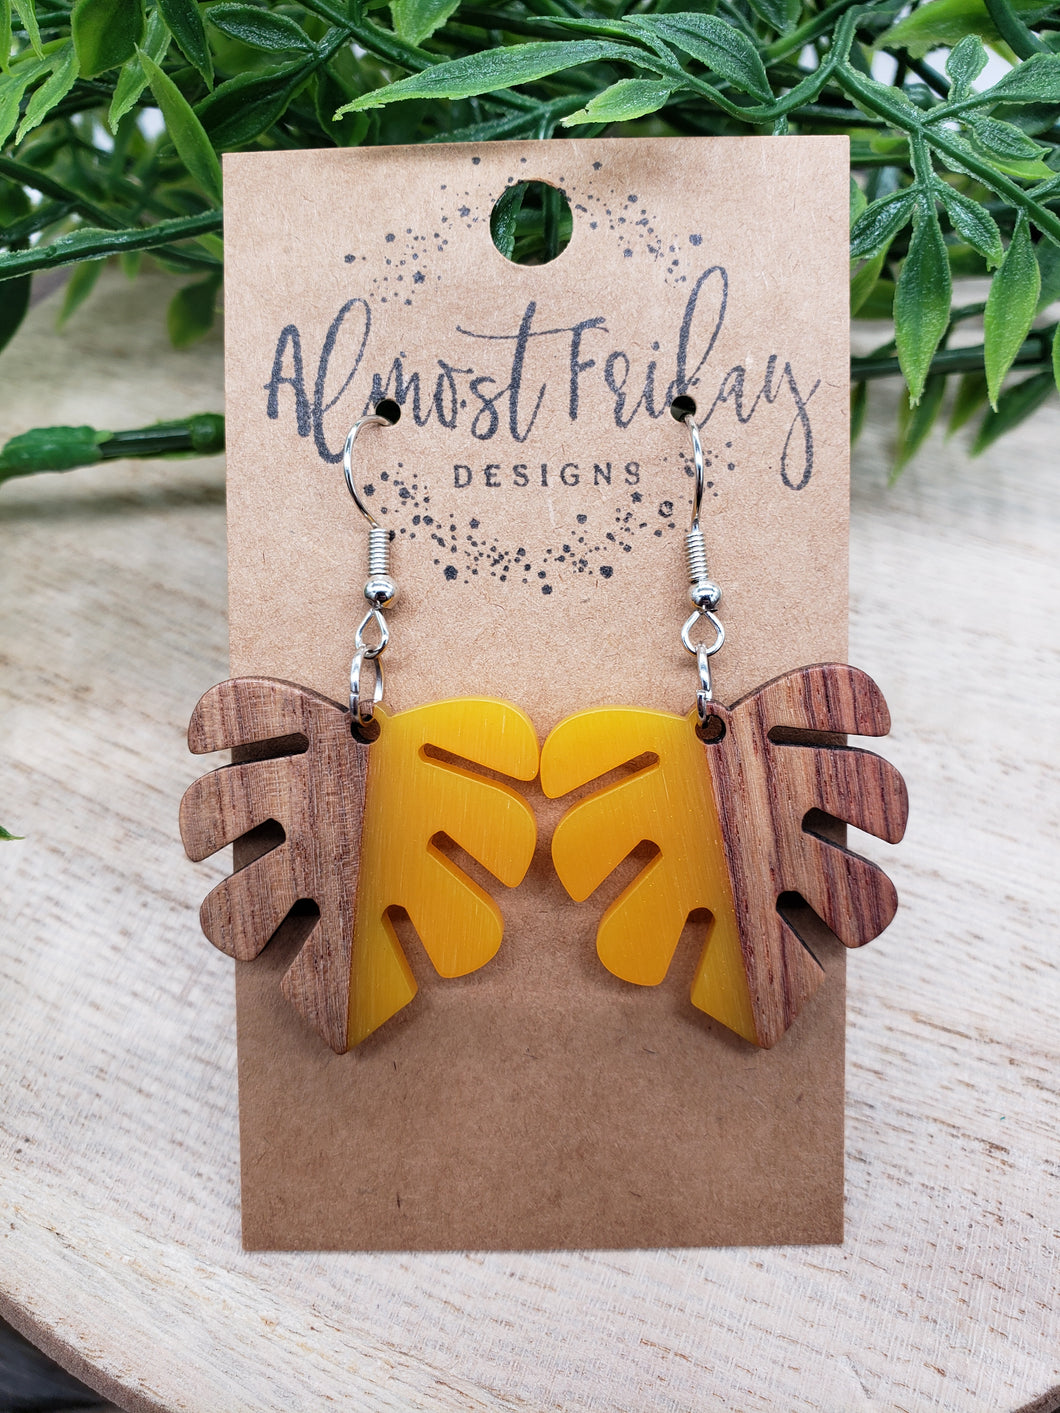 Wood and Resin Earrings - Monstera Leaf -Yellow Earrings - Statement Earrings - Leaf Earrings - Summer Earrings